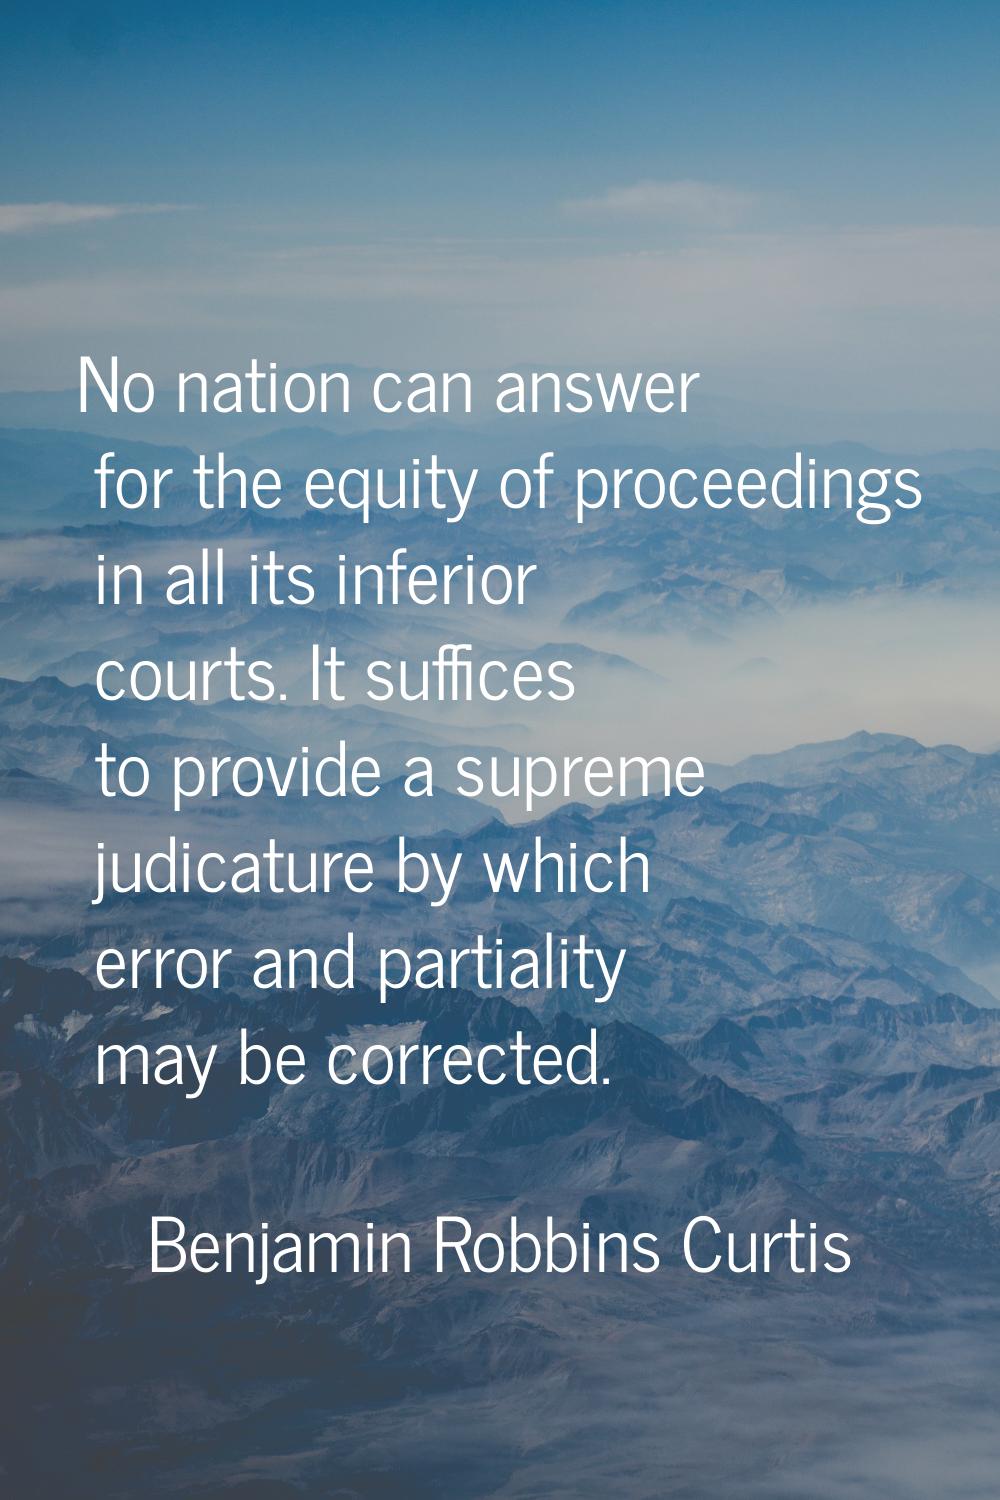 No nation can answer for the equity of proceedings in all its inferior courts. It suffices to provi